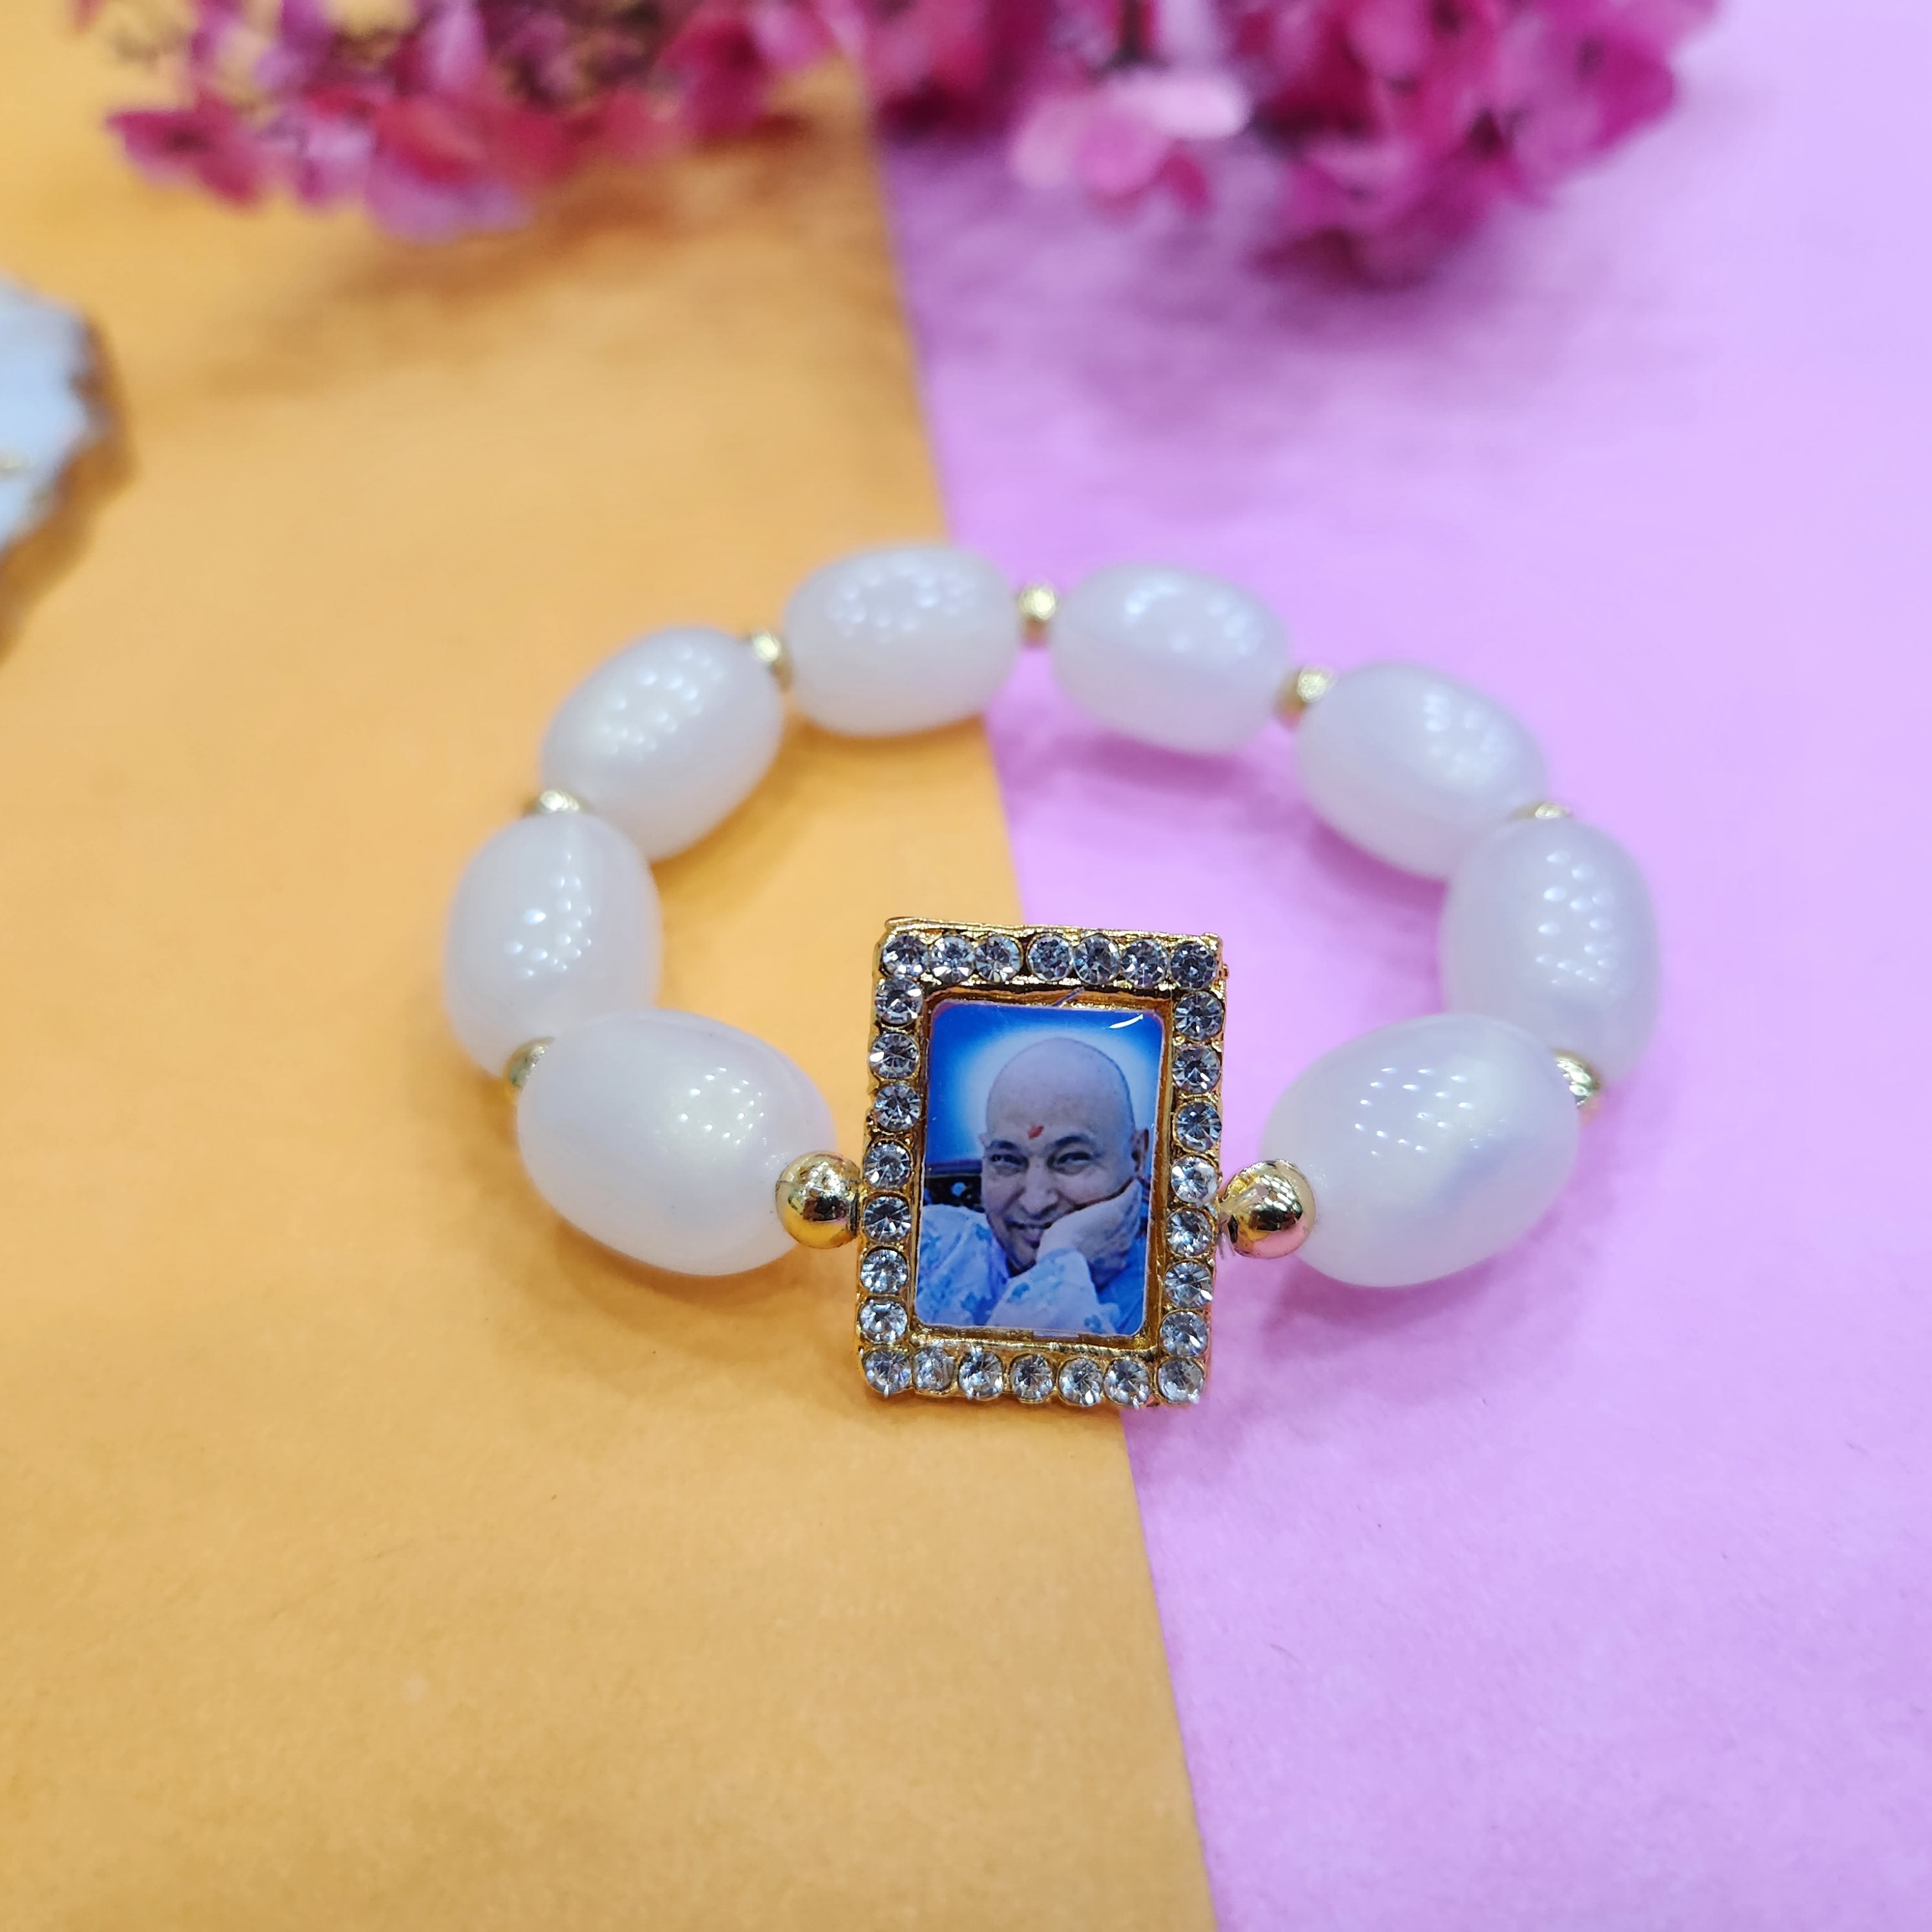 Catholic Italian religious bracelets decenaries Also personalized  religious items  San Michele Arcangelo Religious Articles Rome Italy  Manufacturing Wholesale and Personalisations Worldwide deliveries